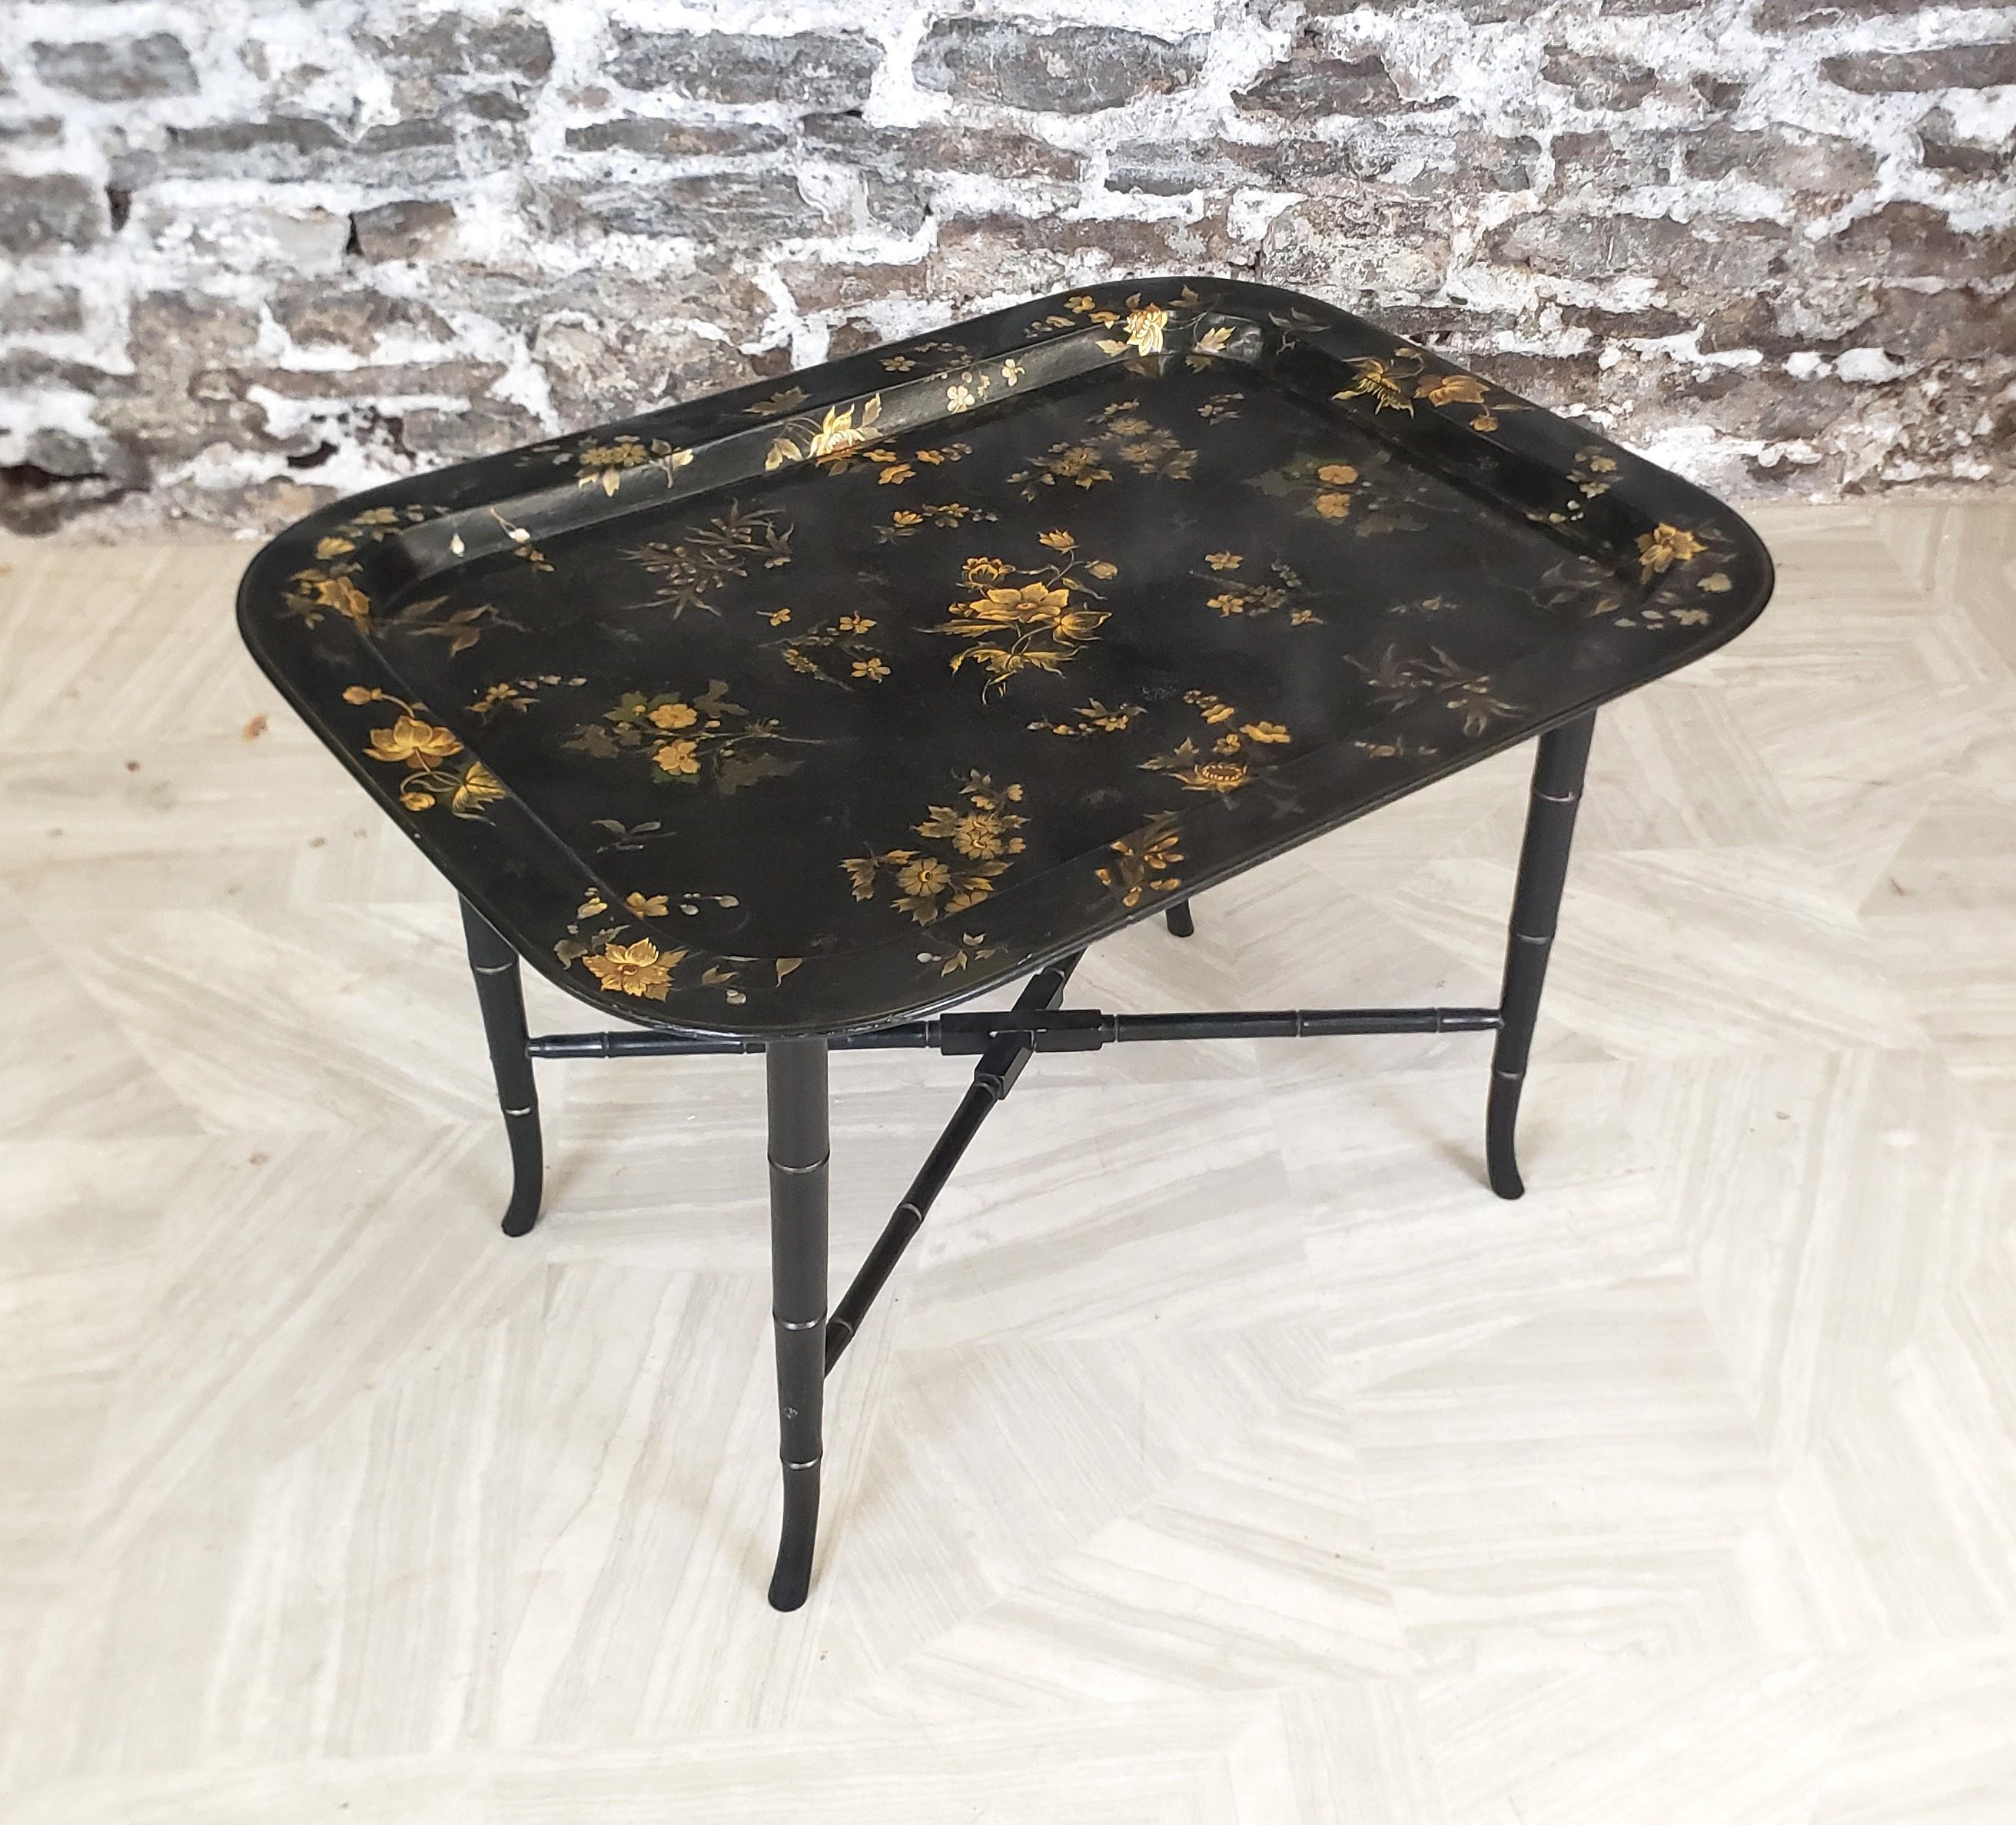 This antique tray table is unsigned, but presumed to have originated from England and date to approximately 1880 and done in a period Victorian style. The antique tray itself is composed of paper mache with ornate gilt floral decoration and a glossy